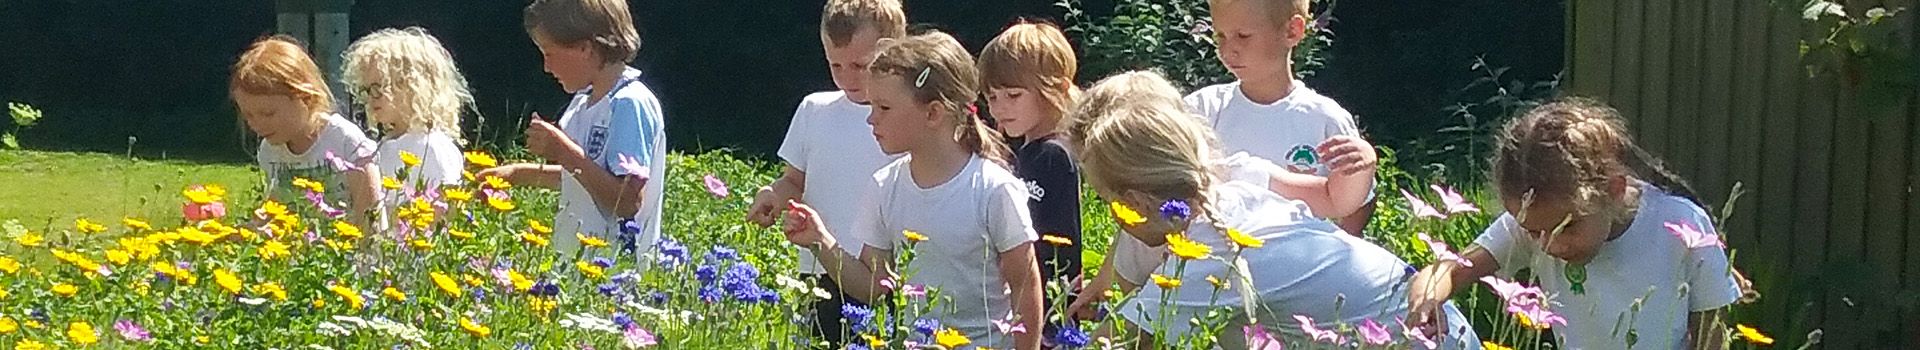 School children explore a wild meadow of red and yellow flowers.